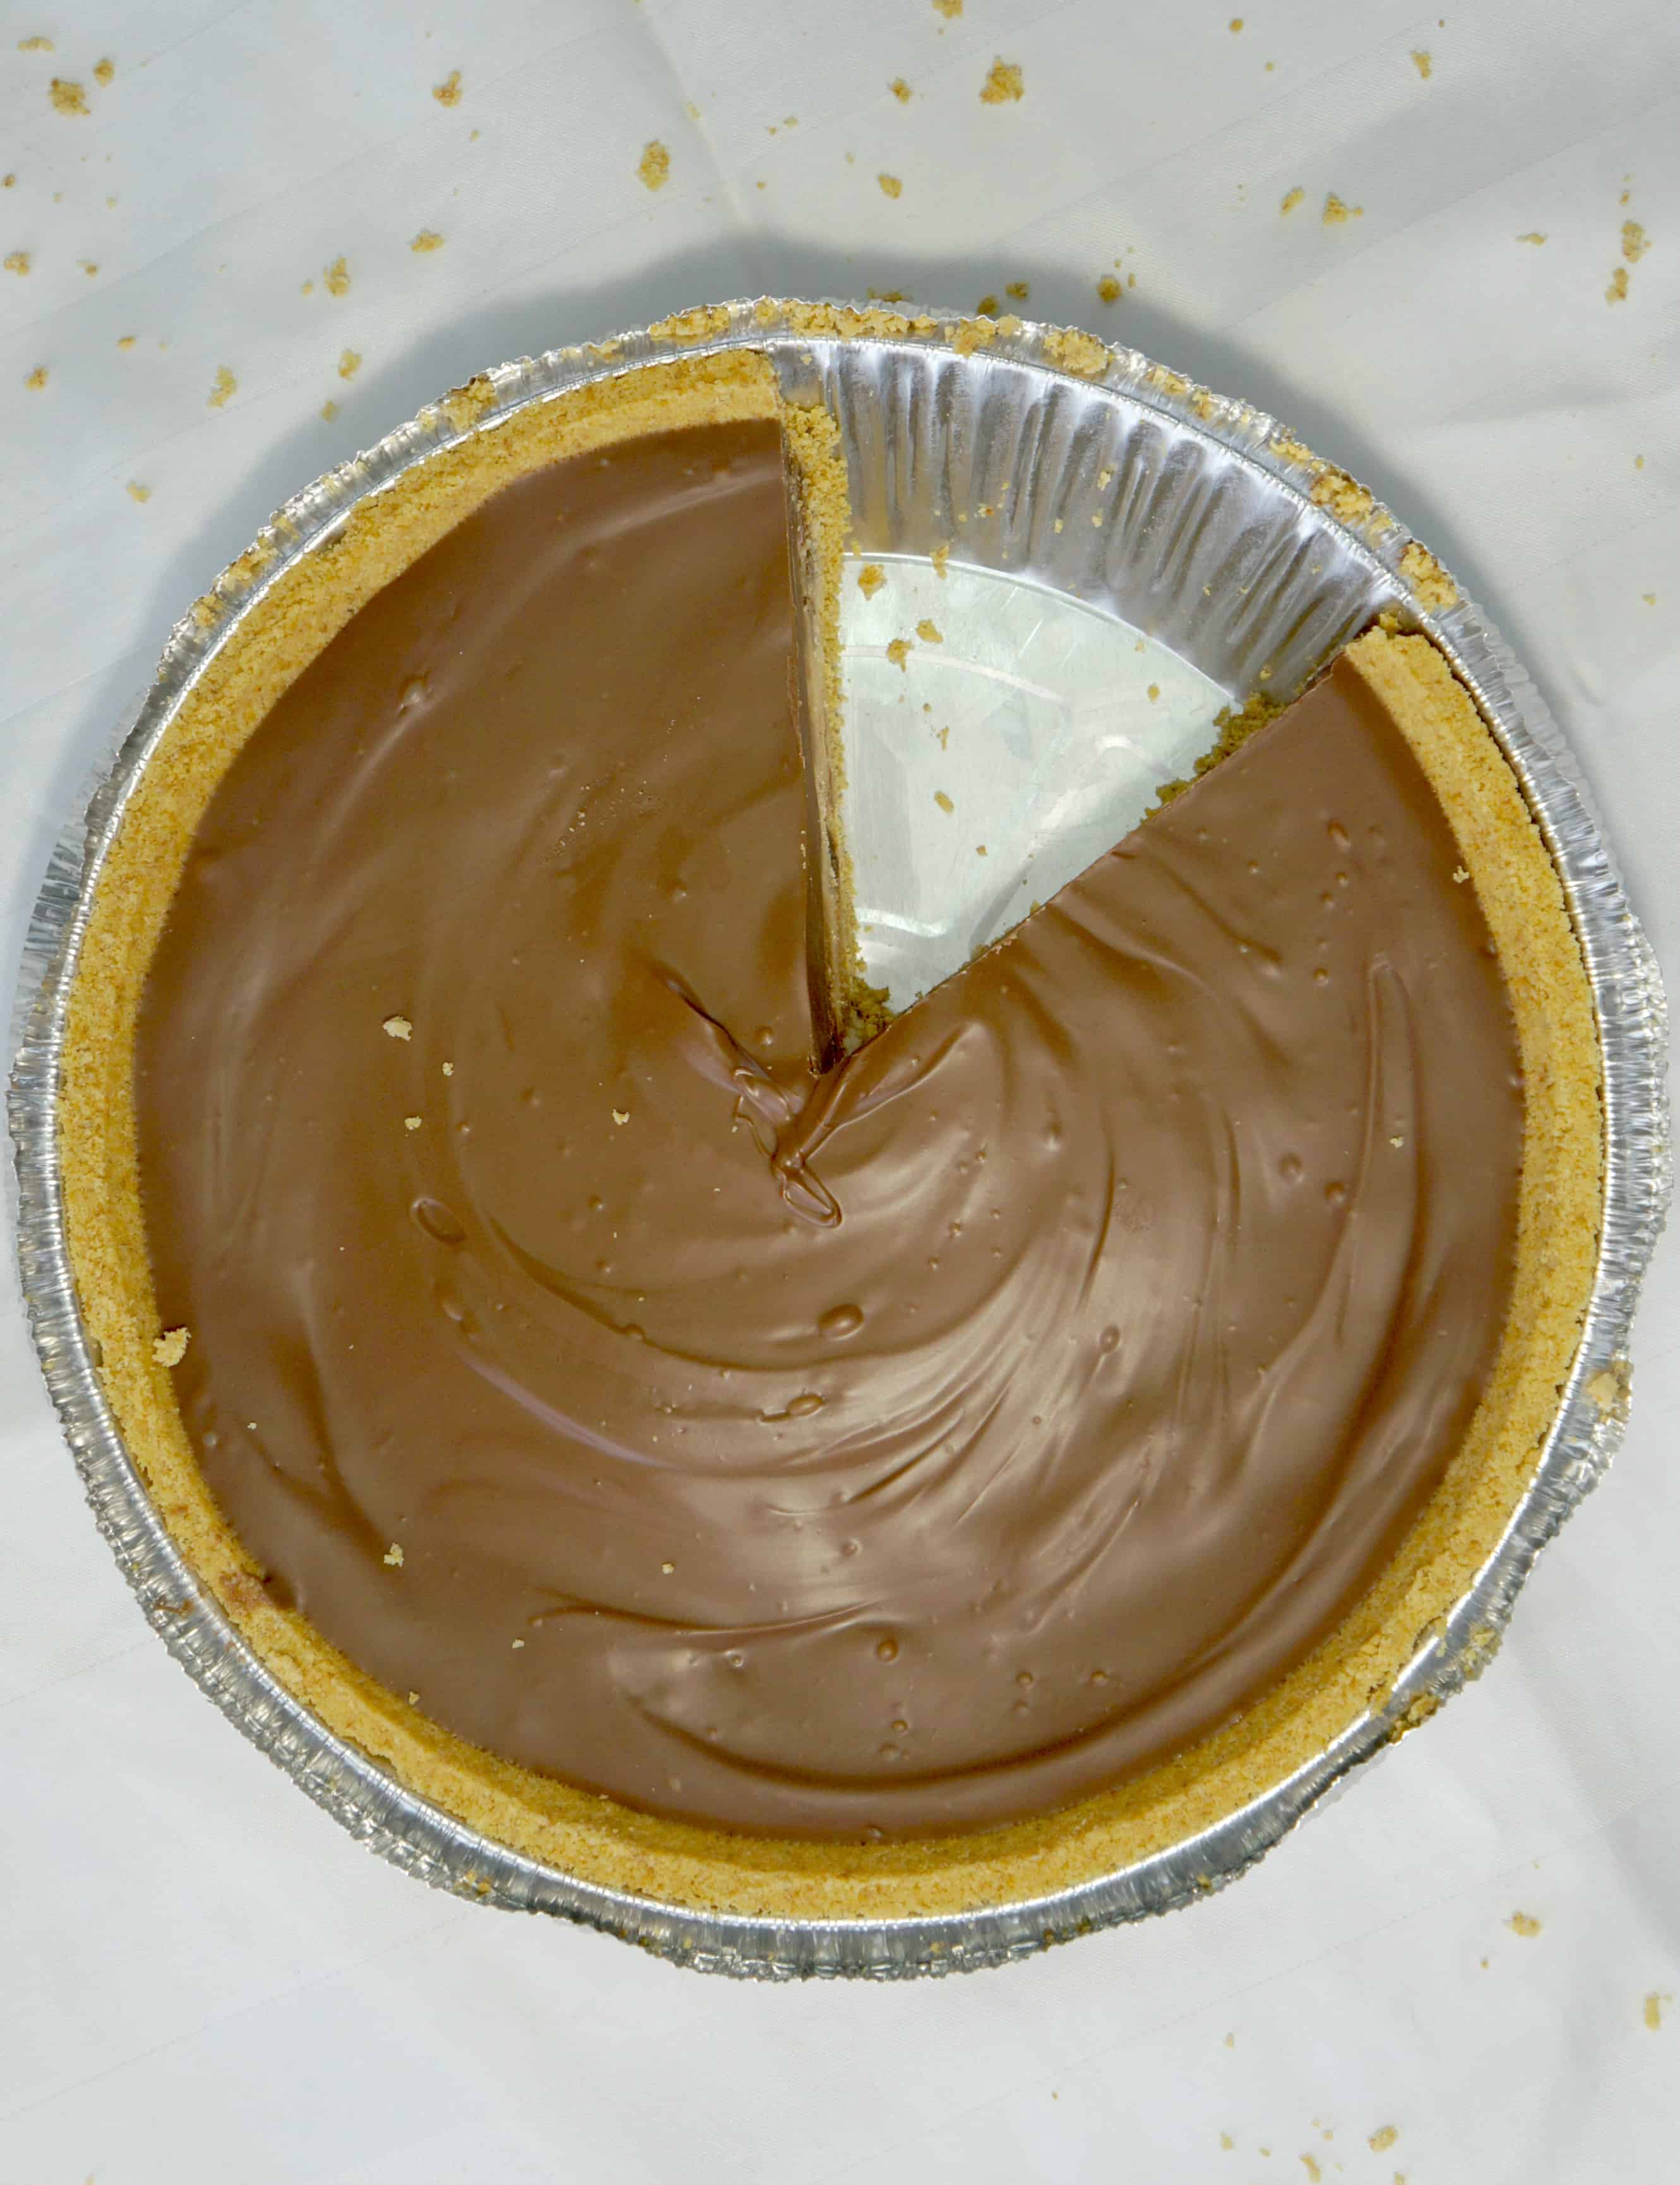 Chocolate Chip Cookie Dough Pie. Edible cookie dough in a graham cracker crust topped with milk chocolate. Easy no bake dessert.